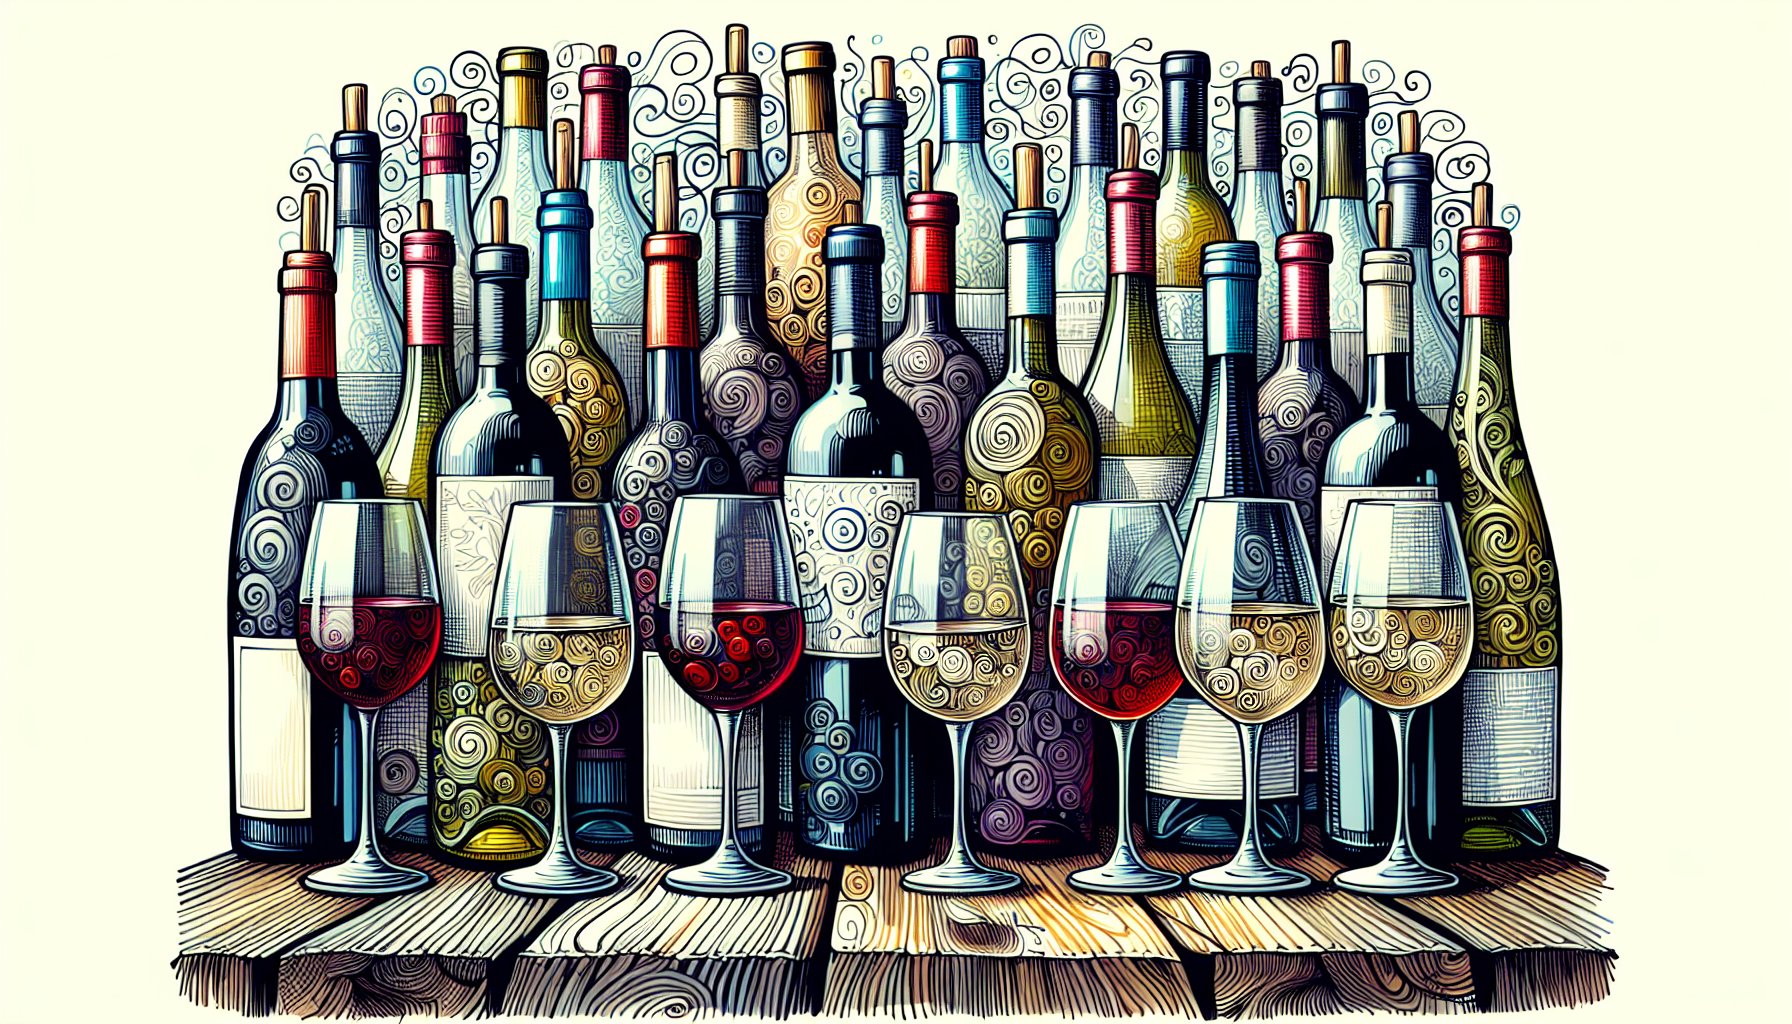 Illustration of a variety of wine bottles and glasses